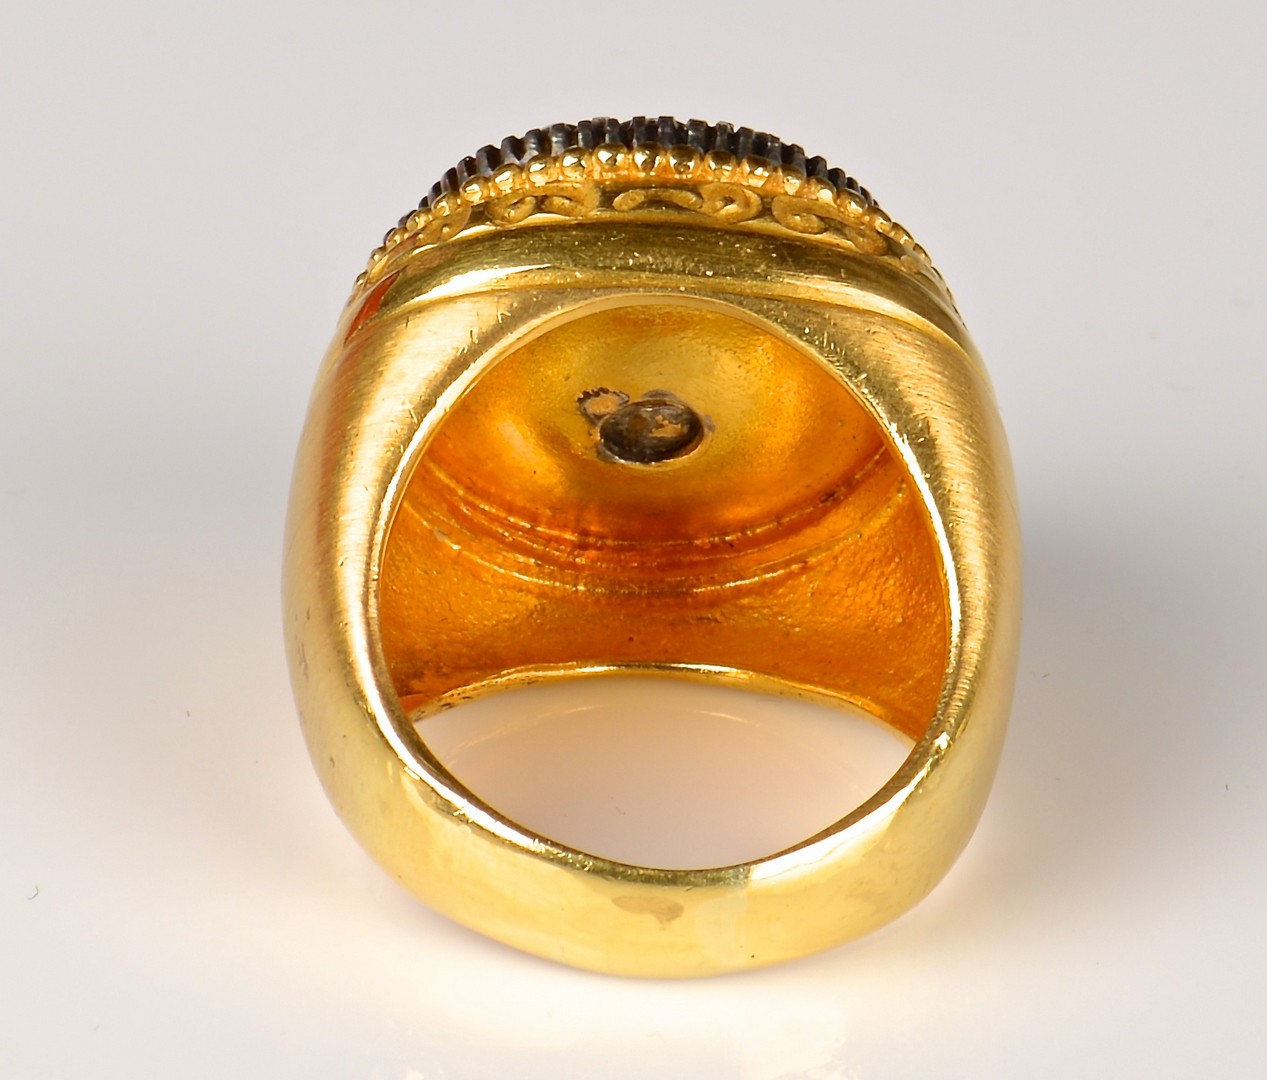 Lot 63: 22K Etruscan style Ring with Rose Cut Diamonds